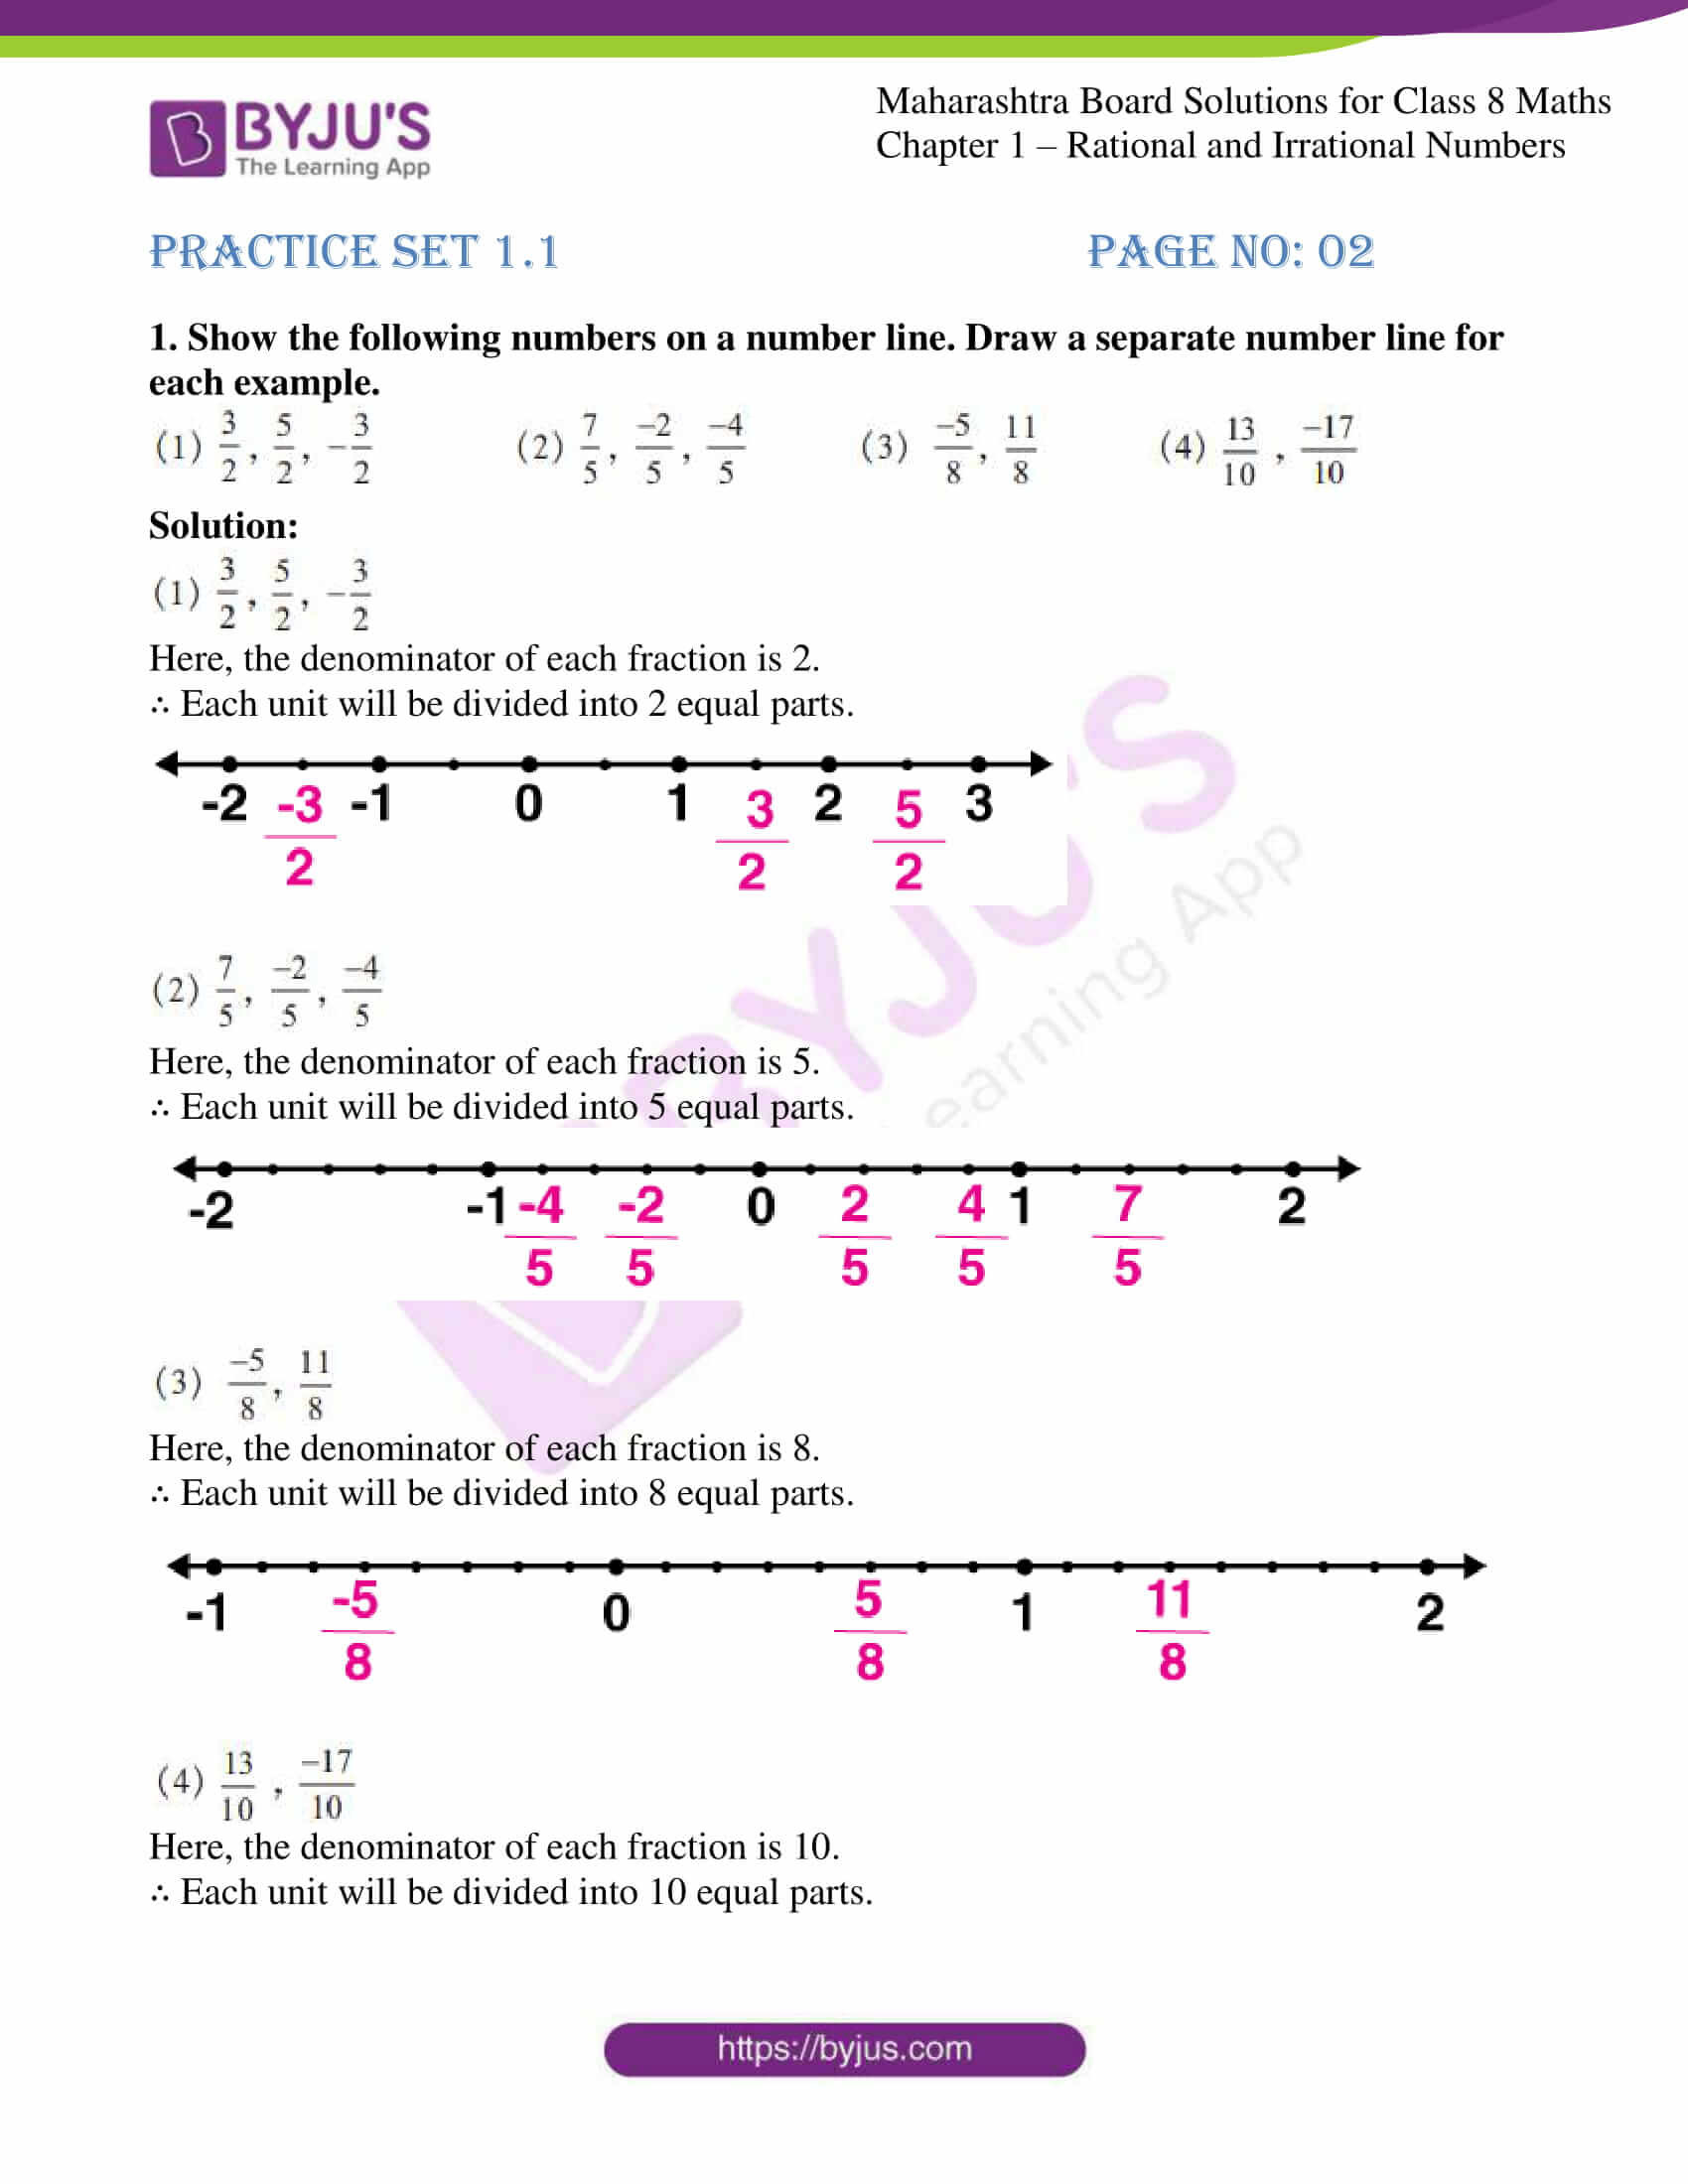 Rational and Irrational Numbers Worksheet Msbshse solutions for Class 8 Maths Part 1 Chapter 1